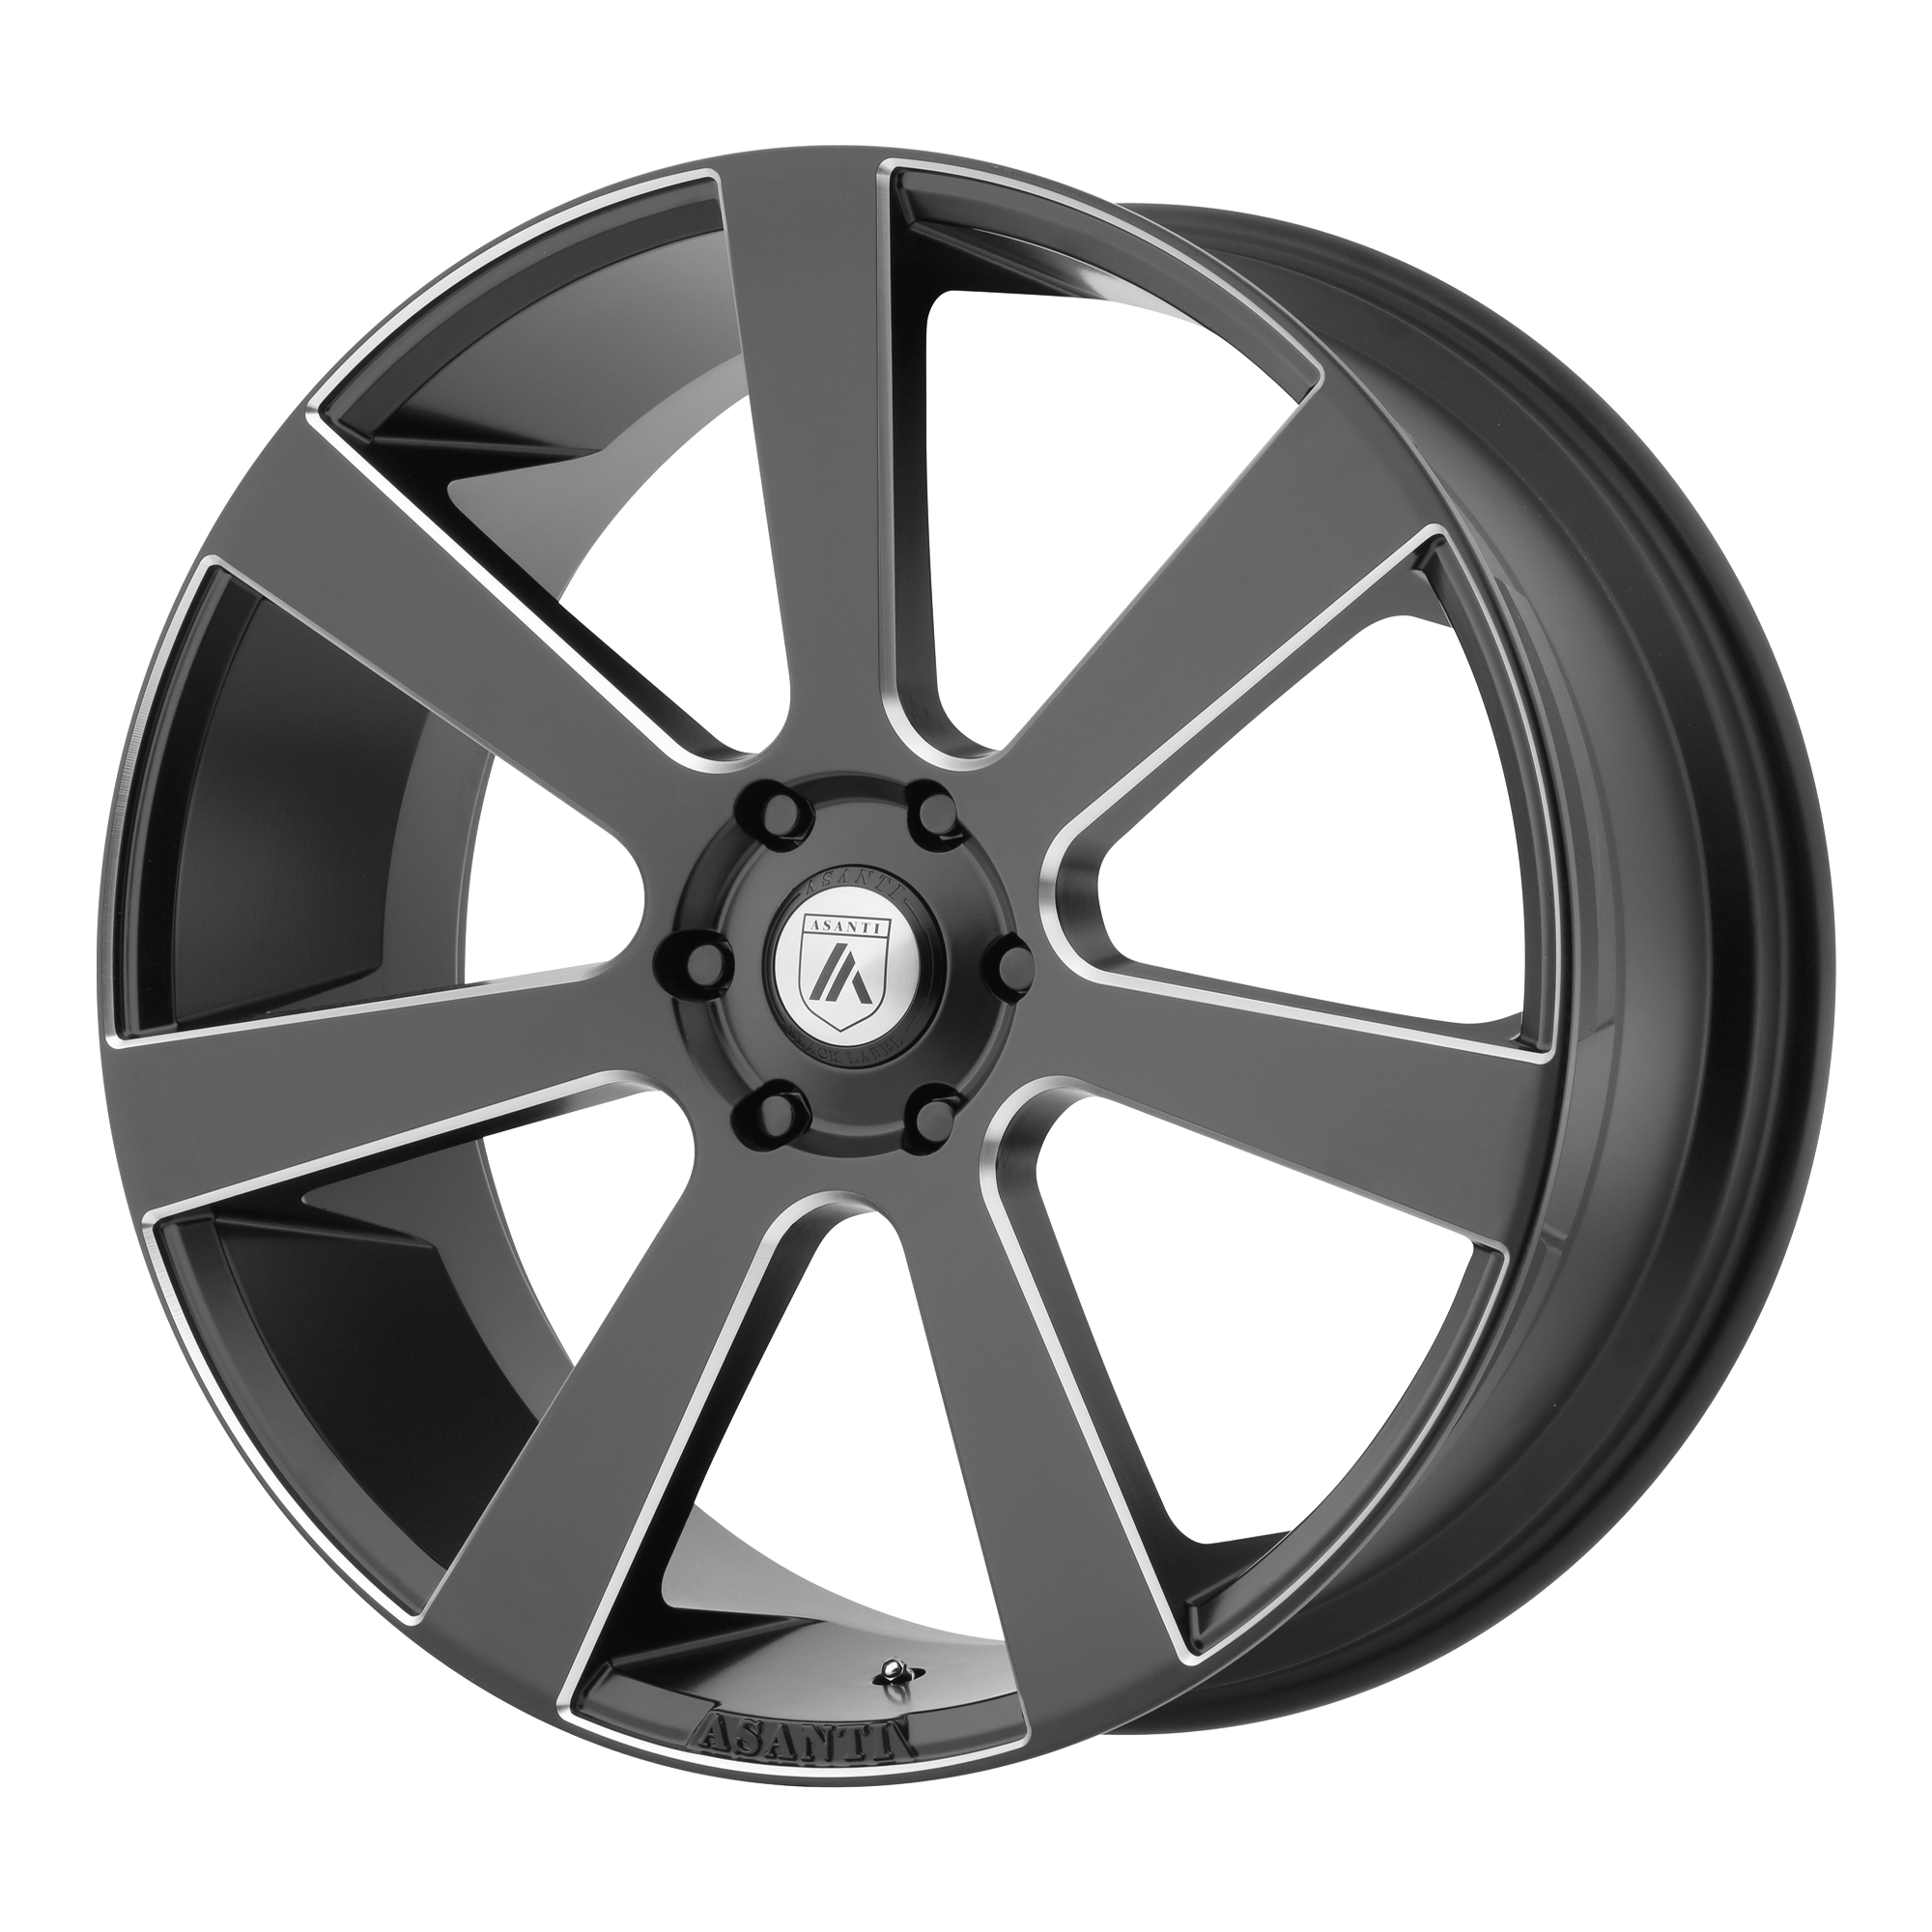 APOLLO 24x9 6x135.00 SATIN BLACK MILLED (35 mm) - Tires and Engine Performance